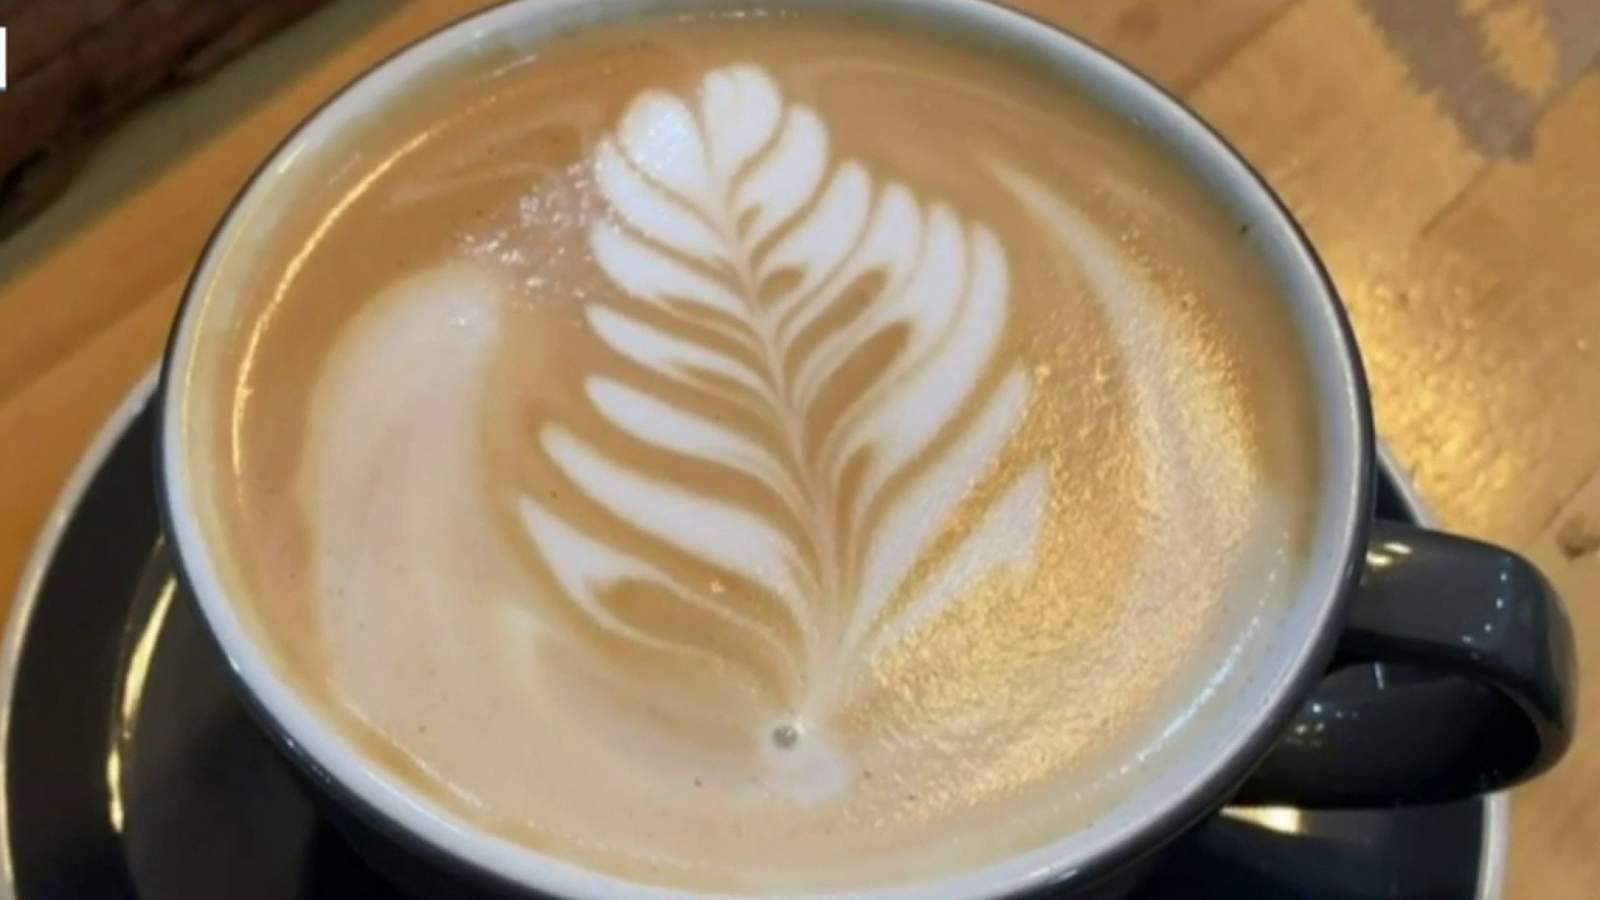 Get your jolt: Here’s some deals being offered on National Coffee Day